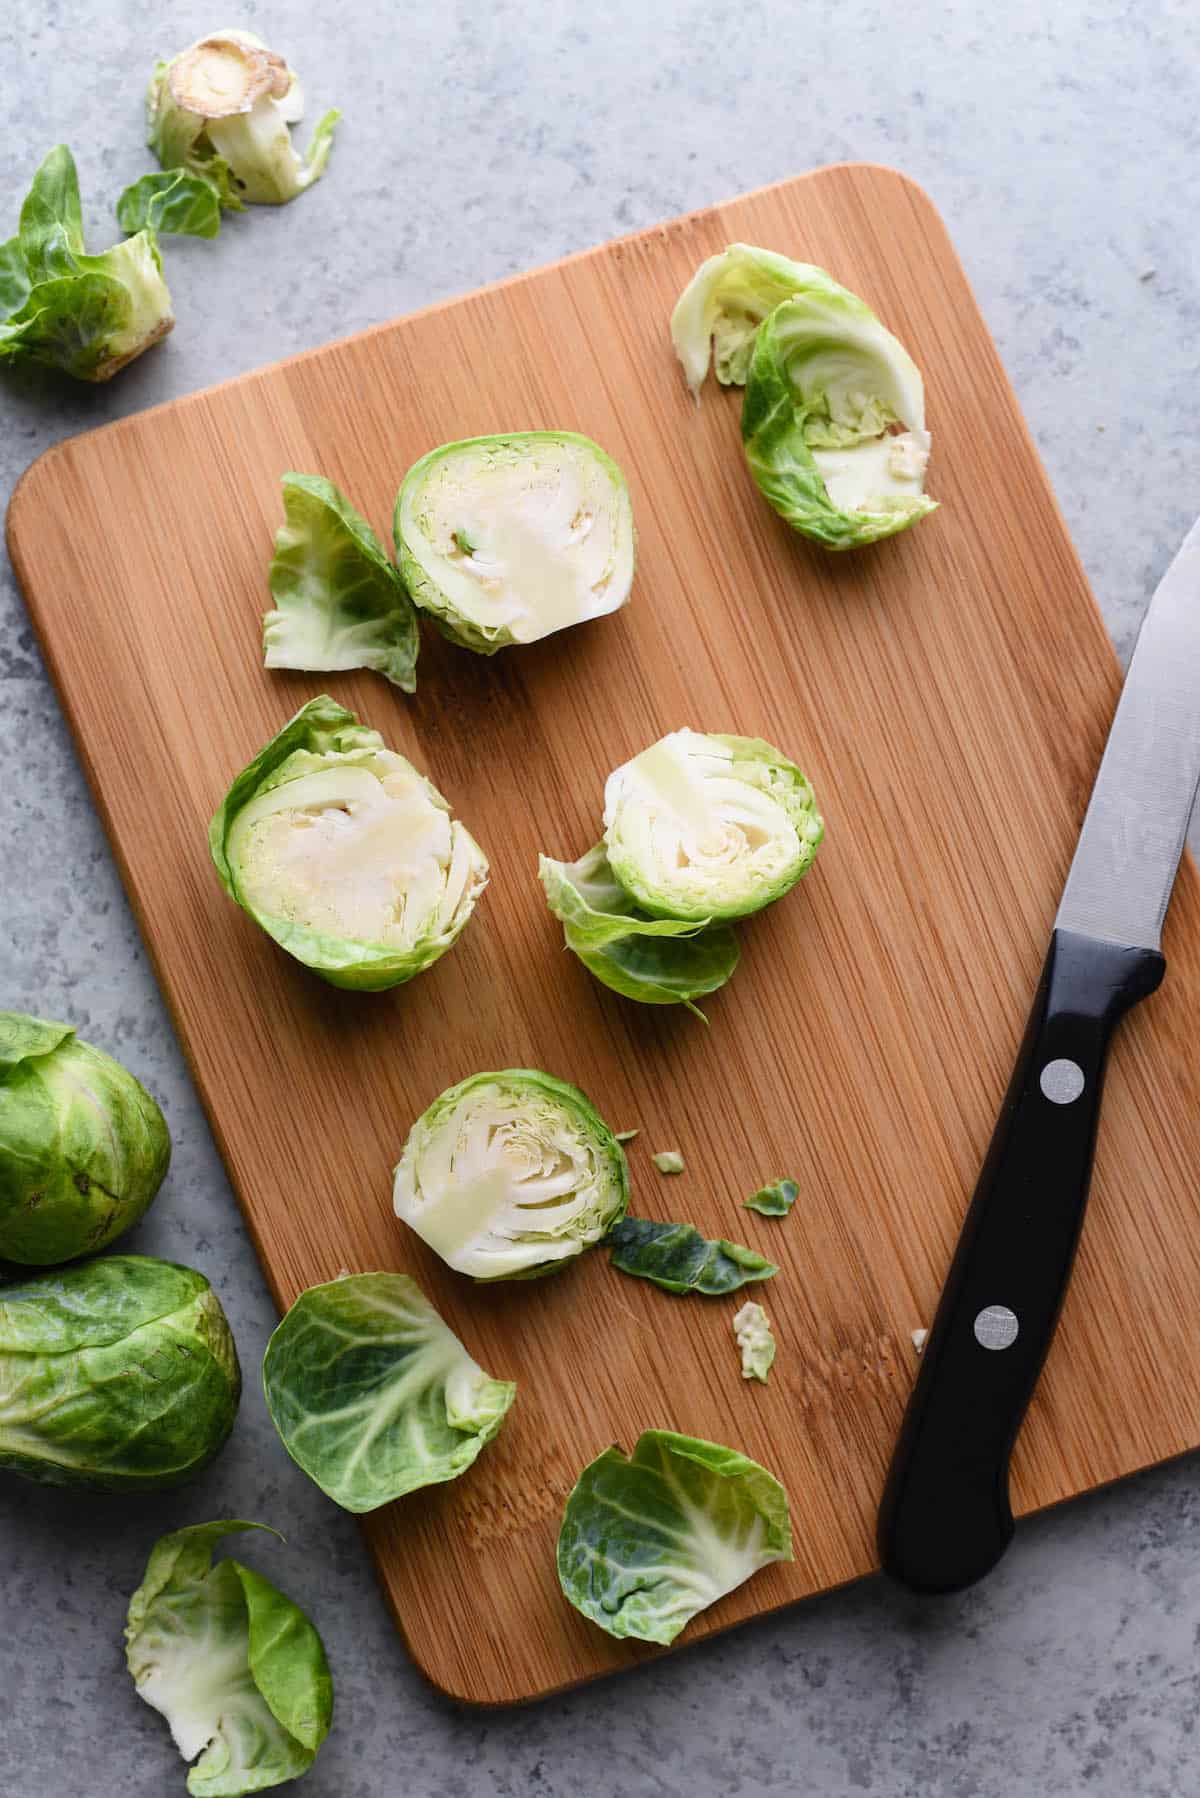 Halved raw brussels sprouts on cutting board with paring knife.